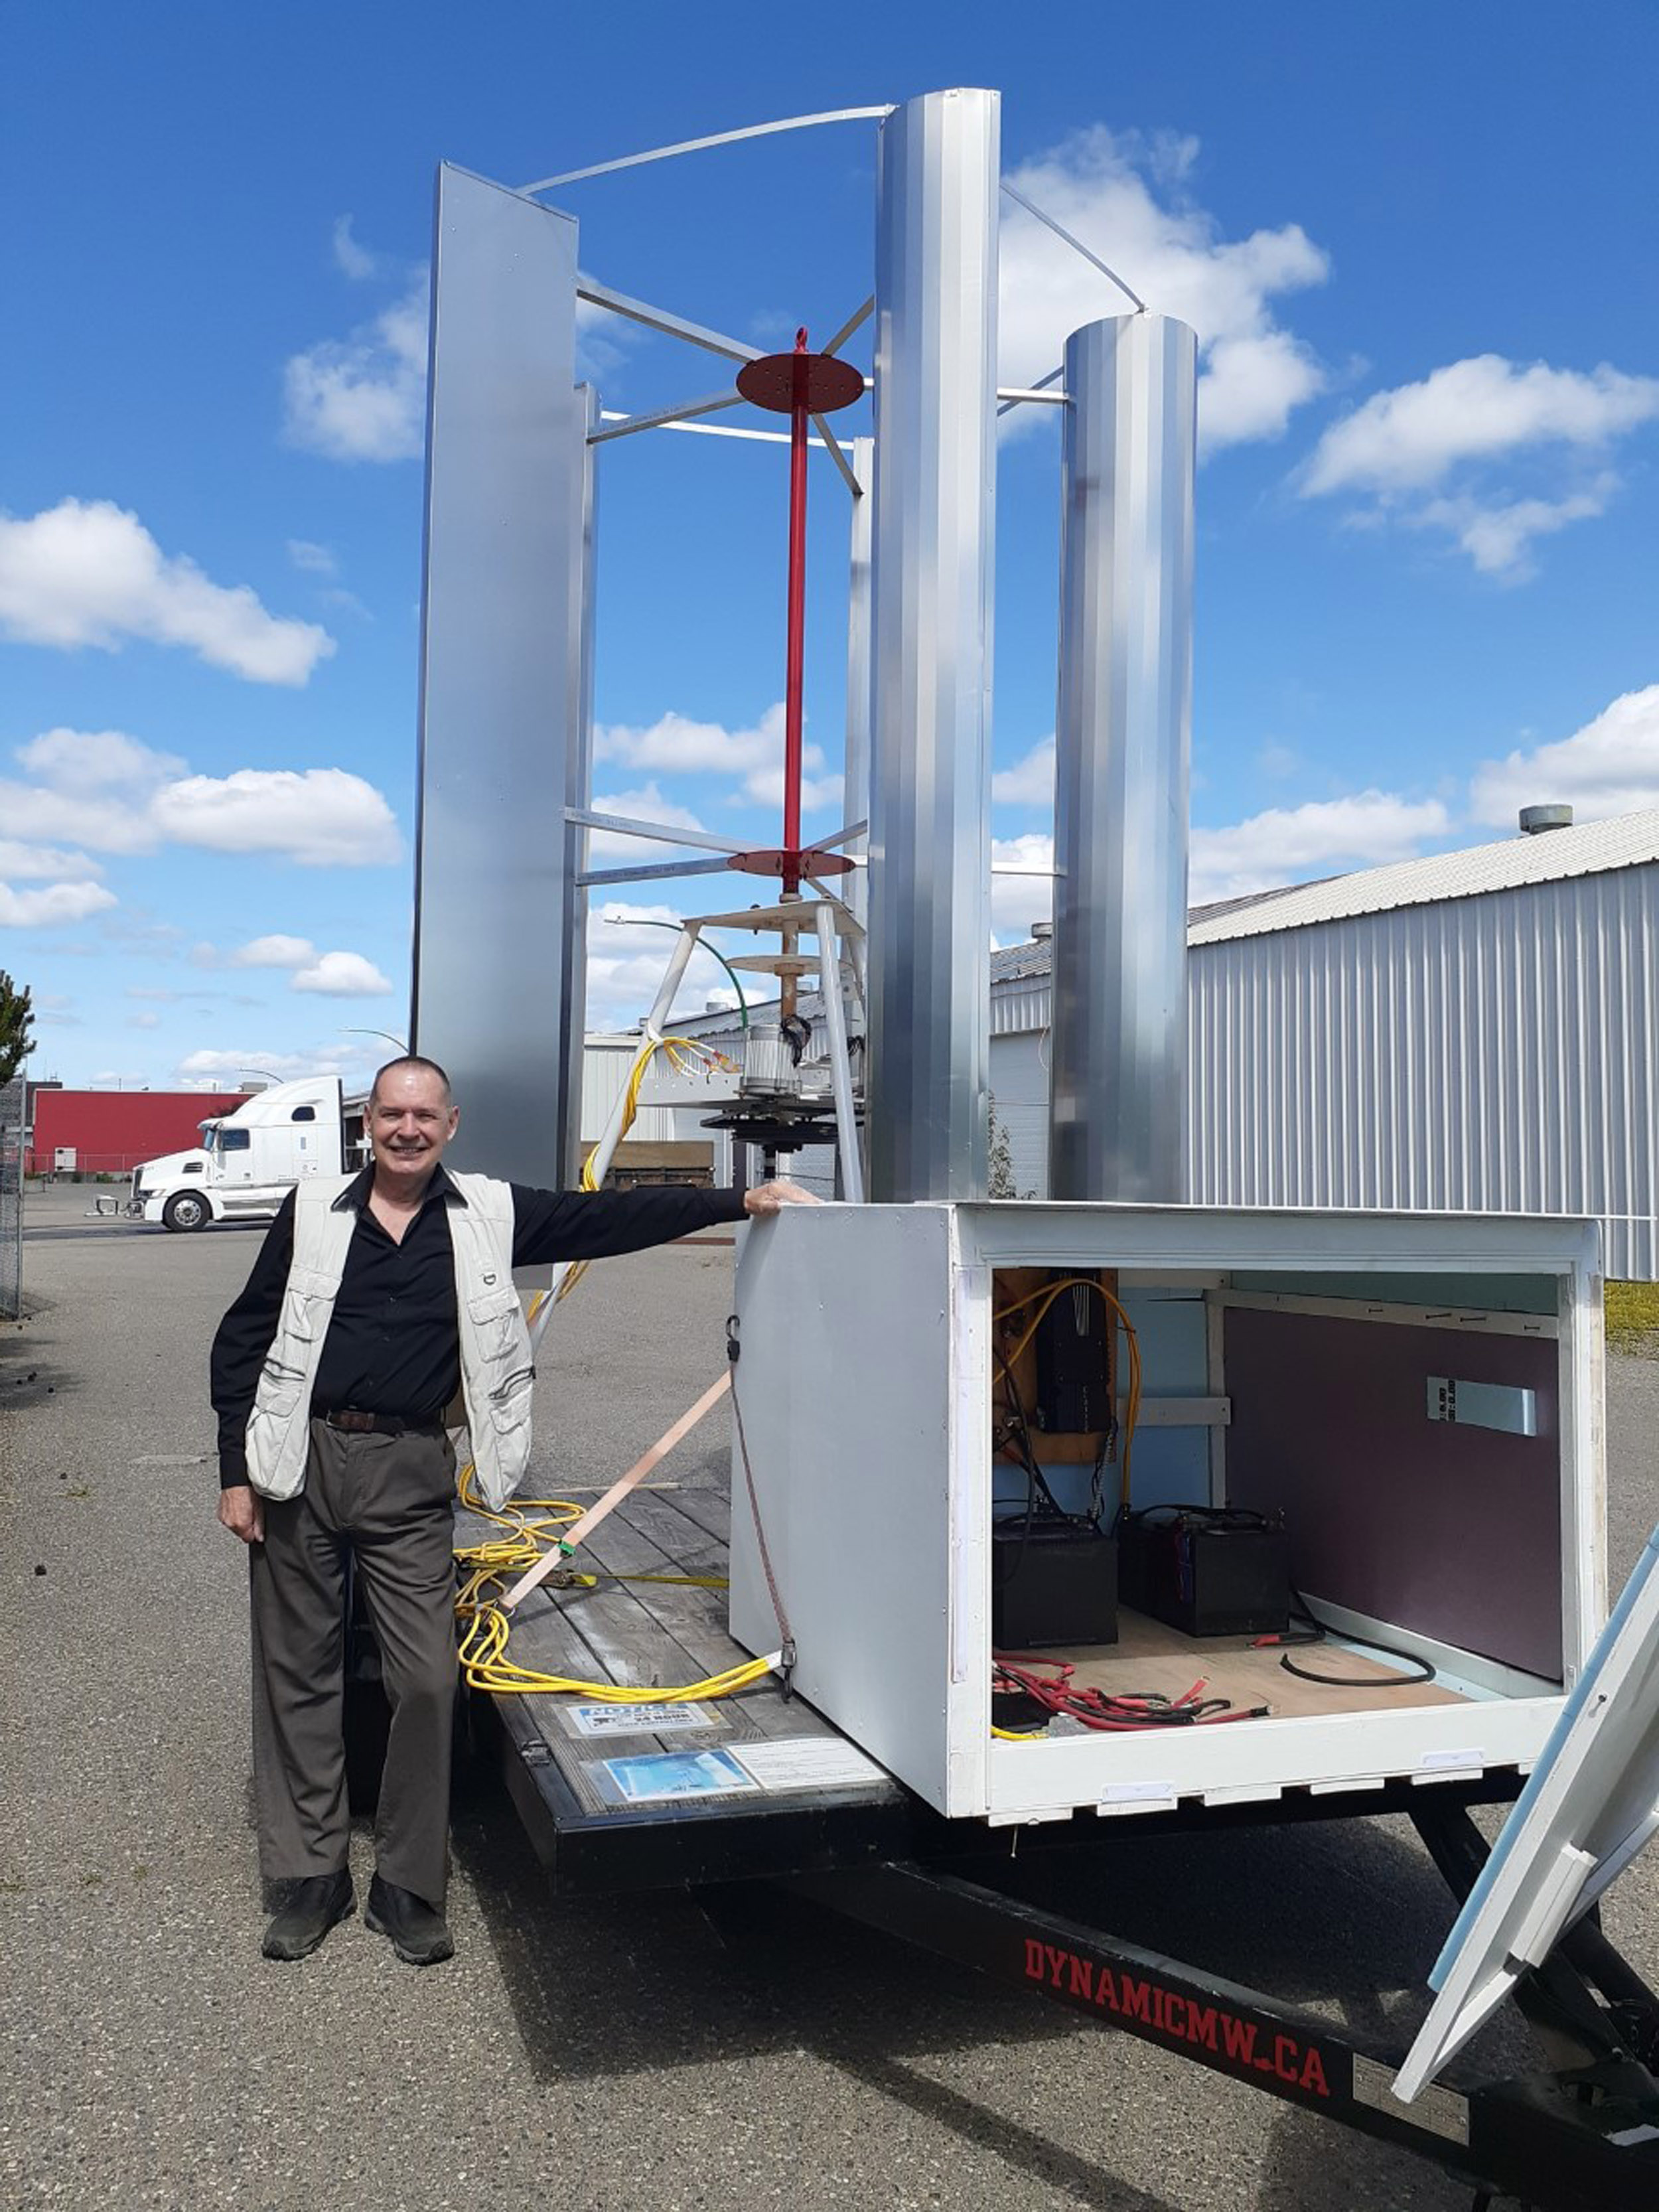 Tochi træ hed Layouten Retired chef whips up homemade wind turbine - Prince George Citizen